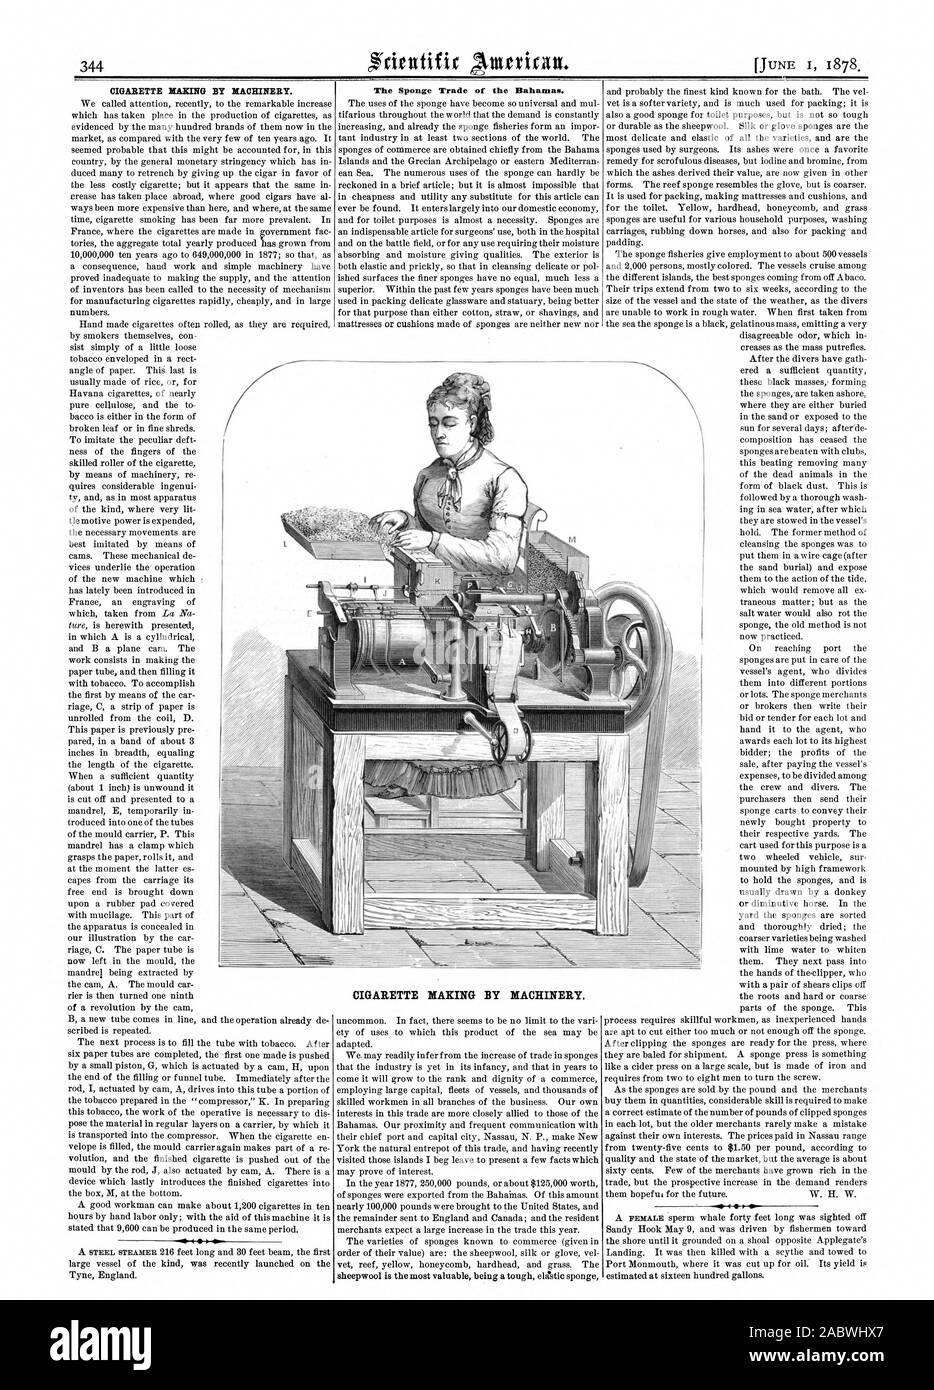 CIGARETTE ittAxnie BY MACHINERY.   The Sponge Trade of the Bahamas. CIGARETTE MAKING BY MACHINERY., scientific american, 1878-06-01 Stock Photo